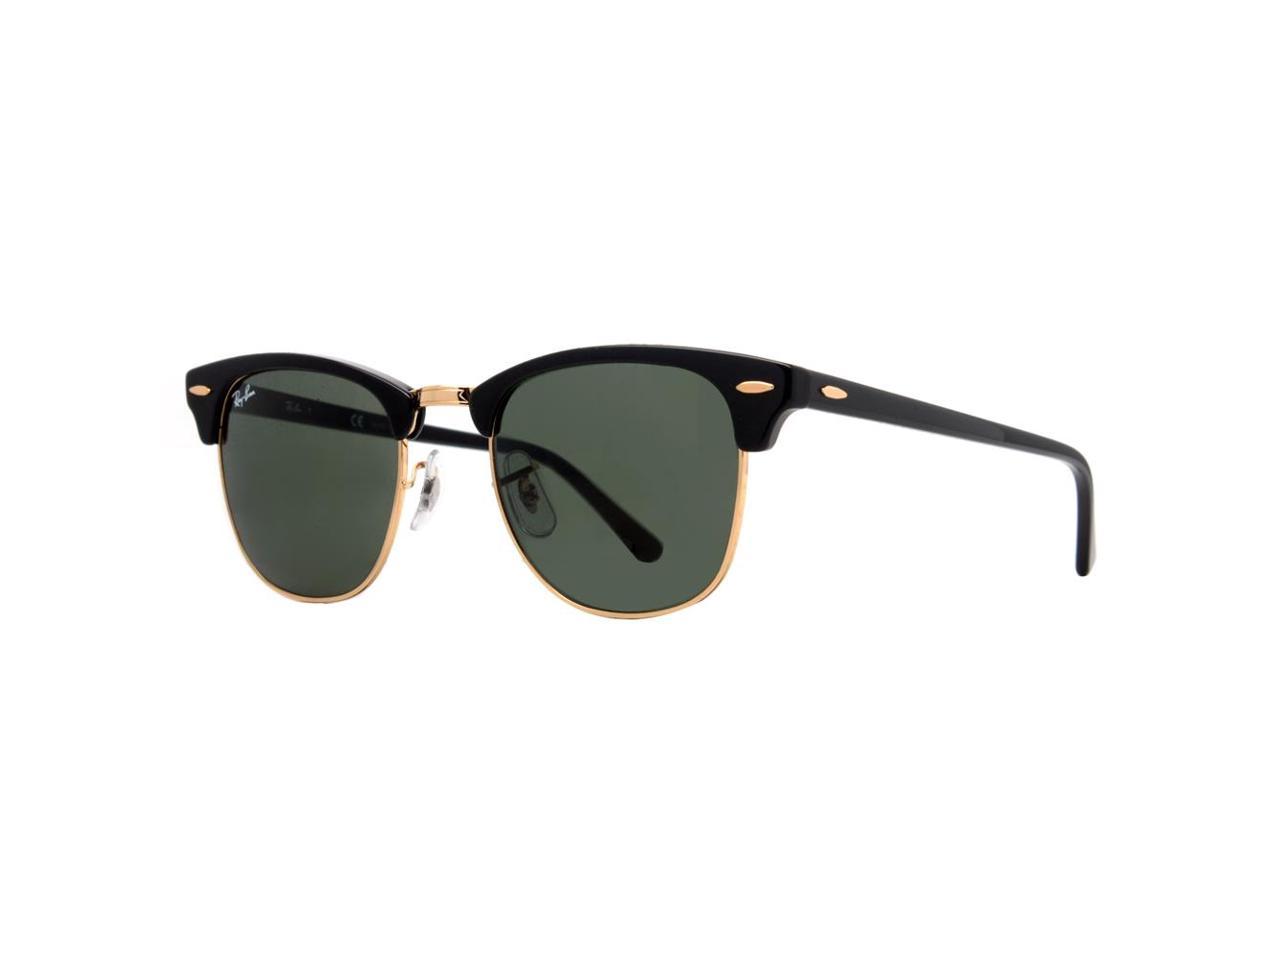 RAY-BAN Made in Italy Stylish Brand New Sunglasses Length 5.25in ...